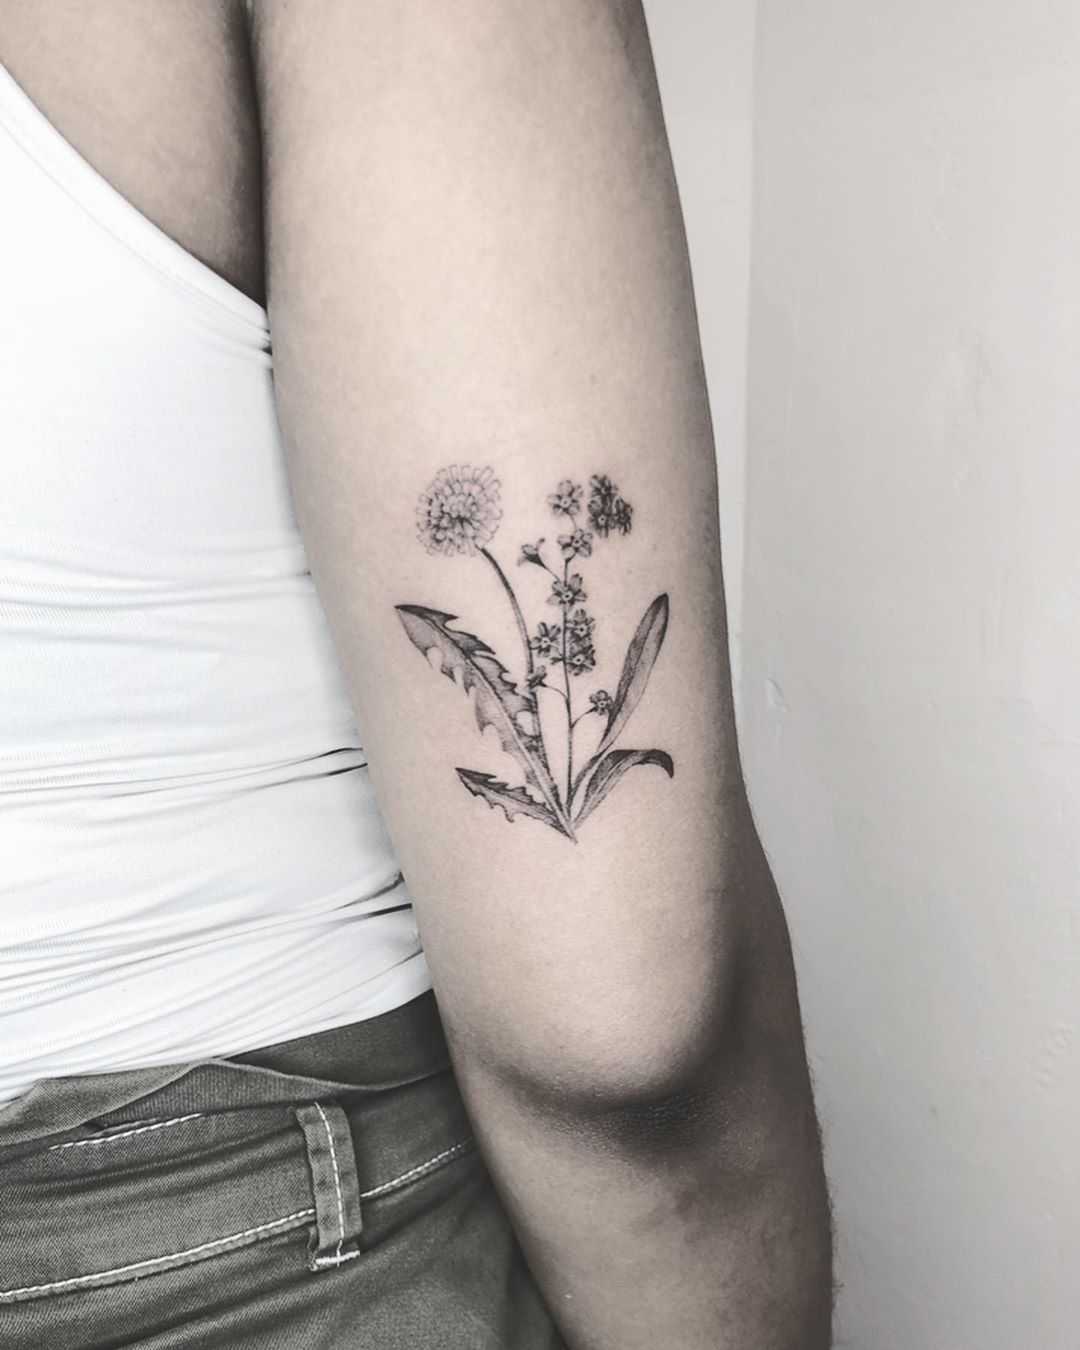 Dandelion and Forget Me Not tattoo by Annelie Fransson